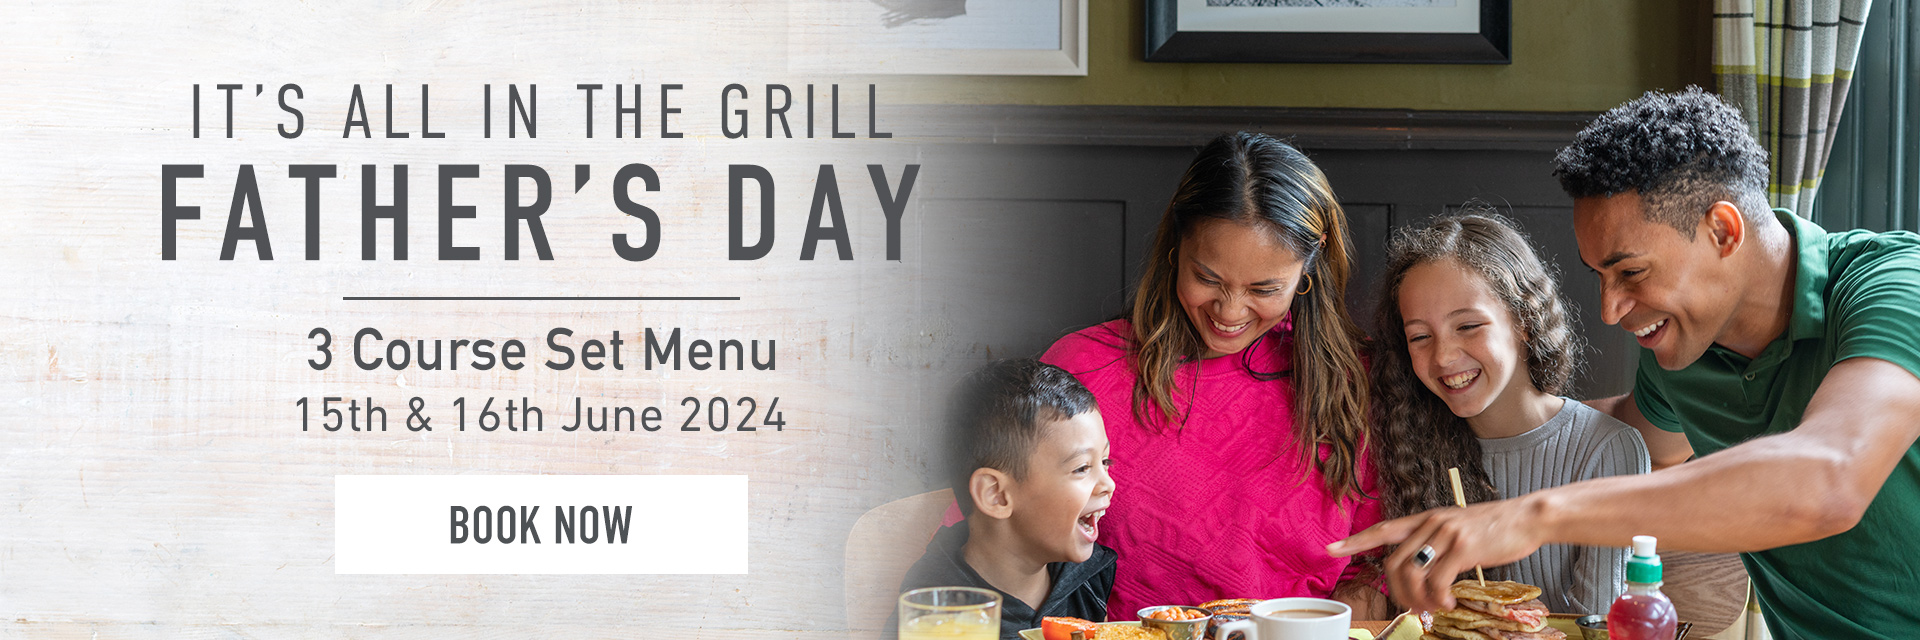 Father’s Day at Harvester Bassetts Pole